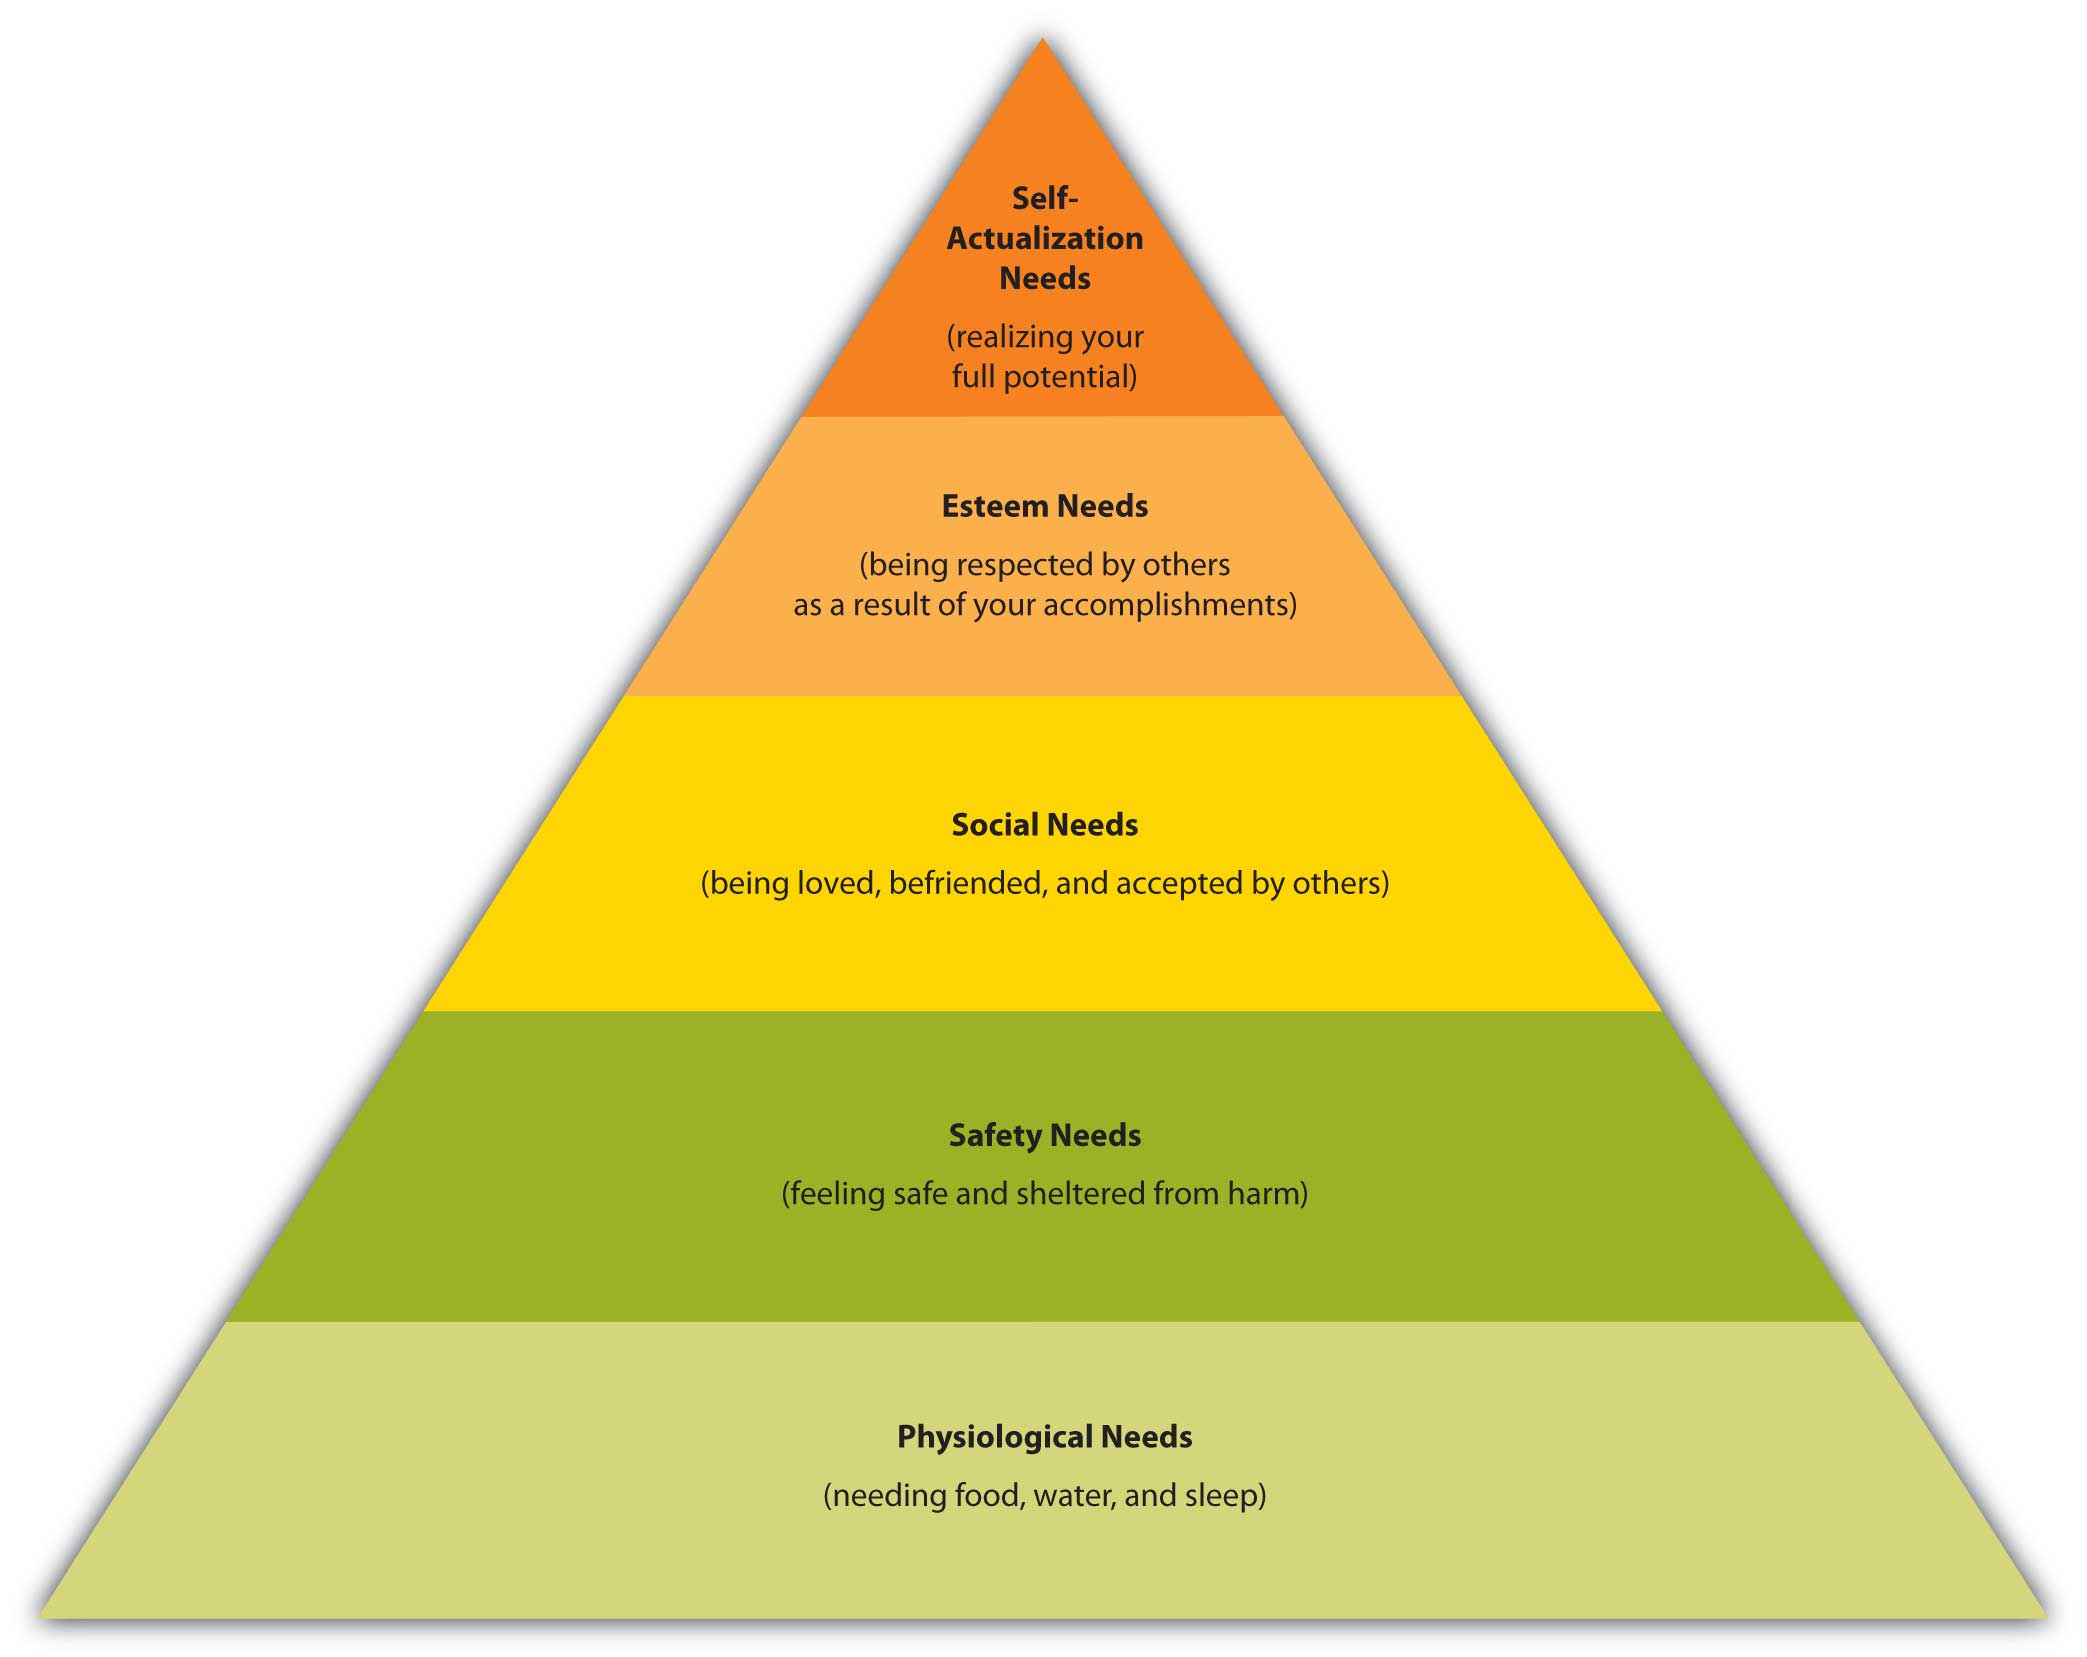 Maslow's Hierarchy of Needs Triangle